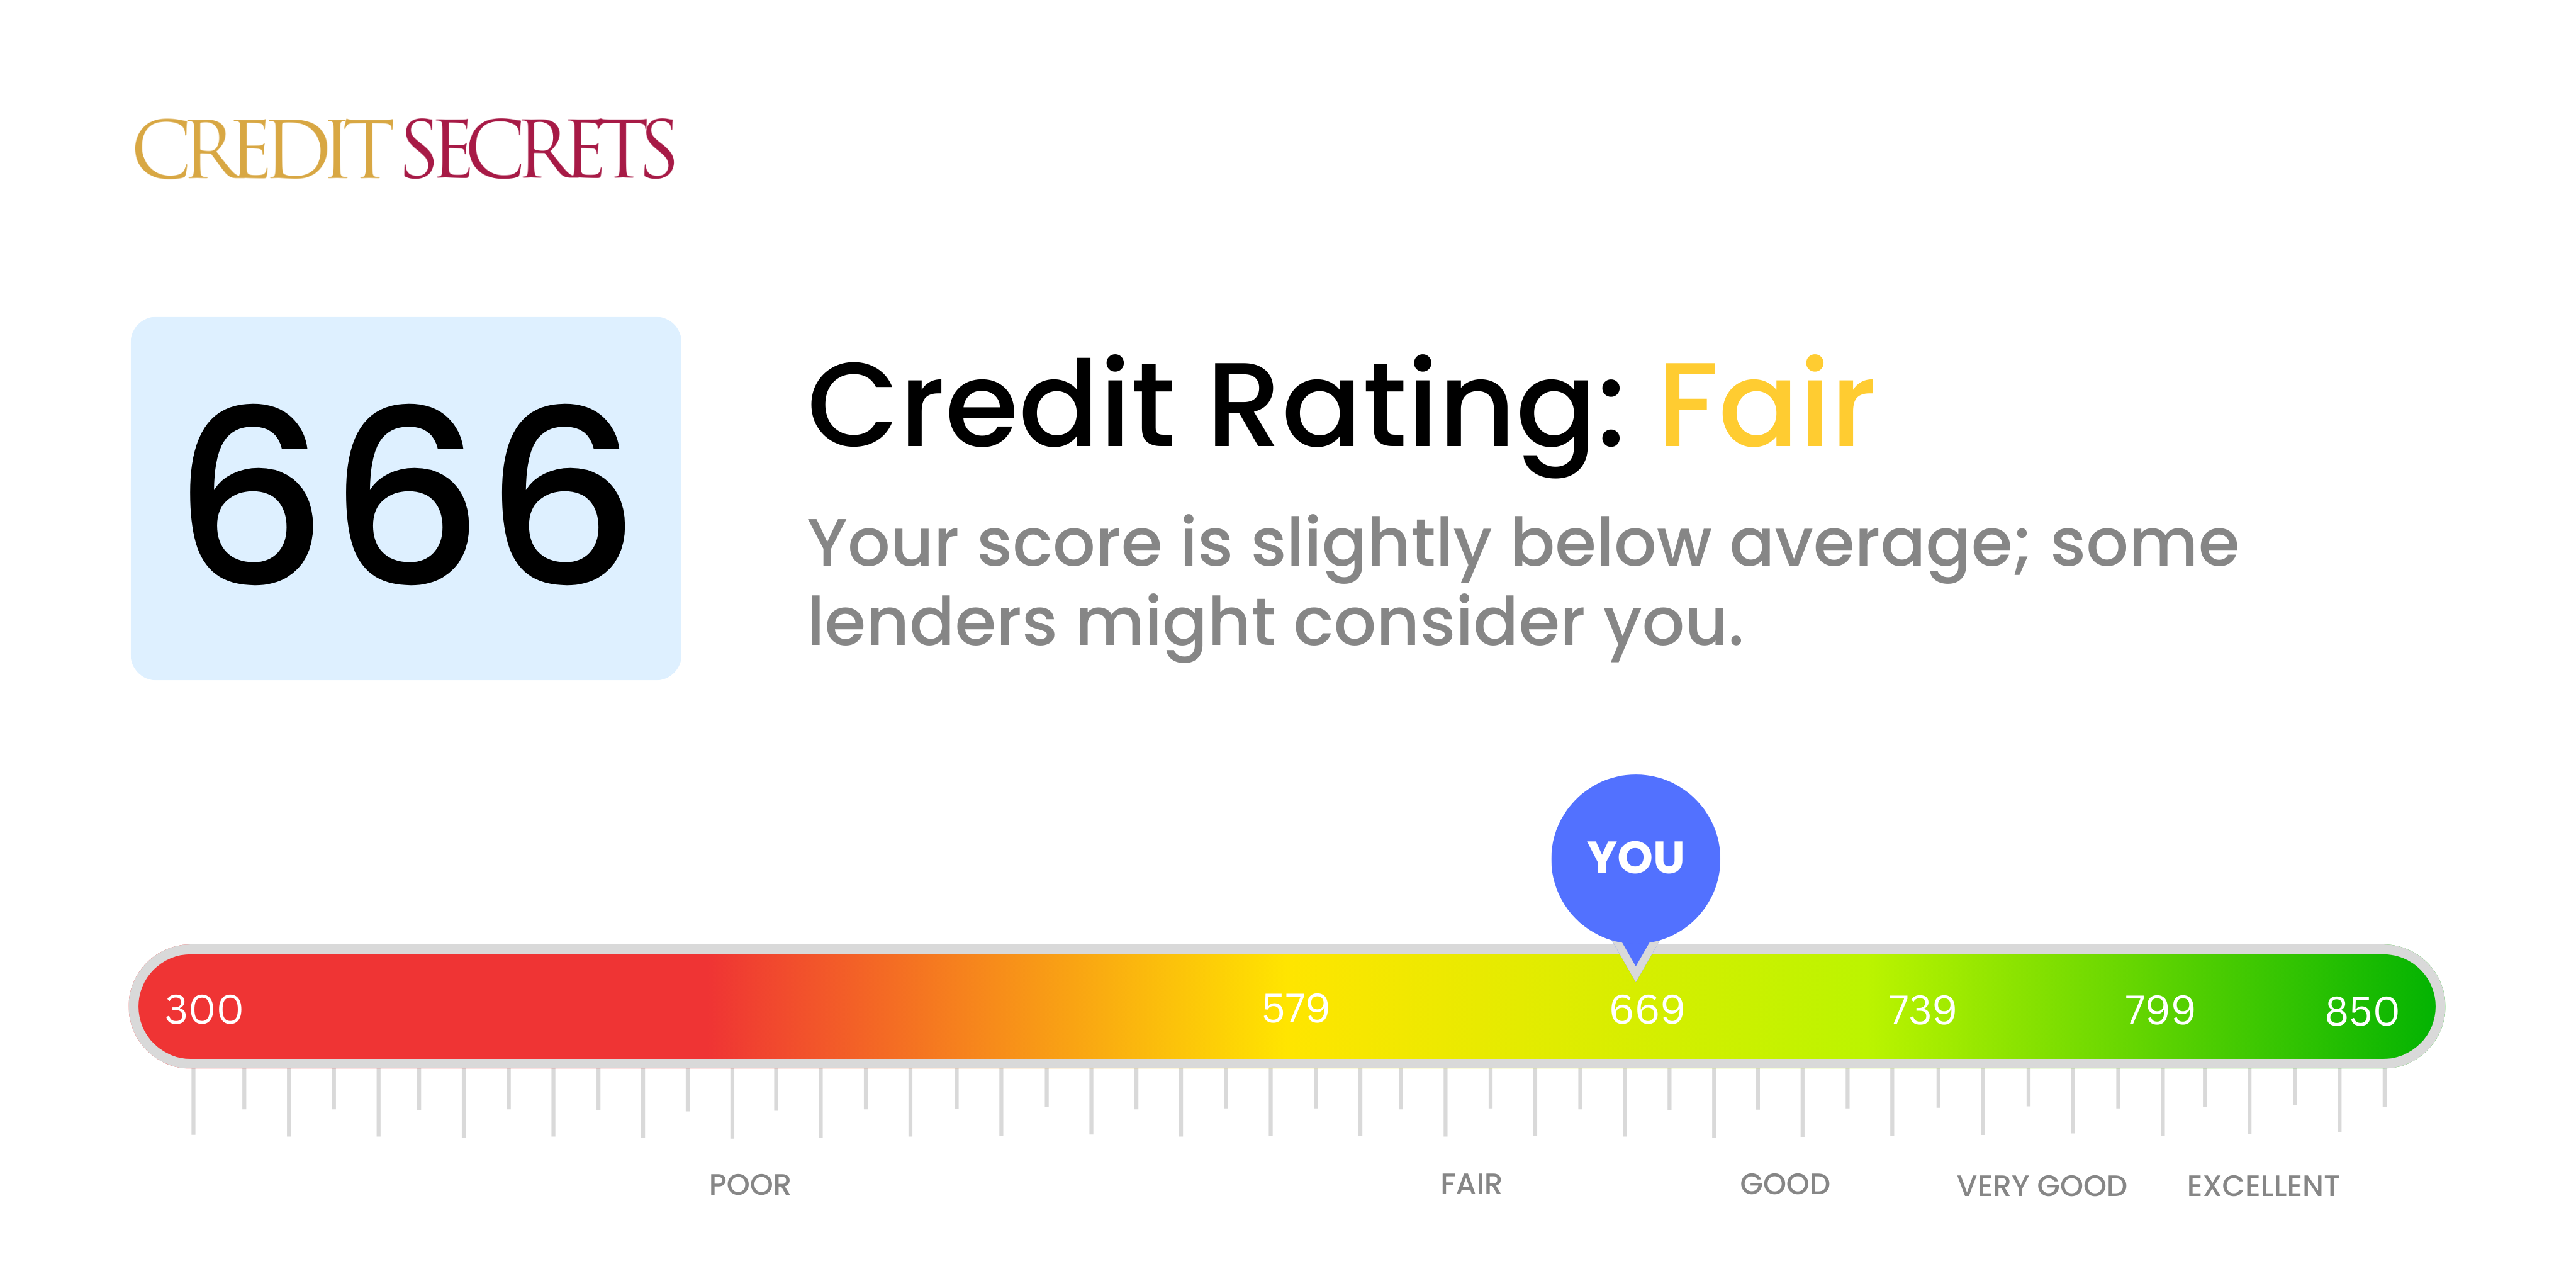 Is 666 a good credit score?